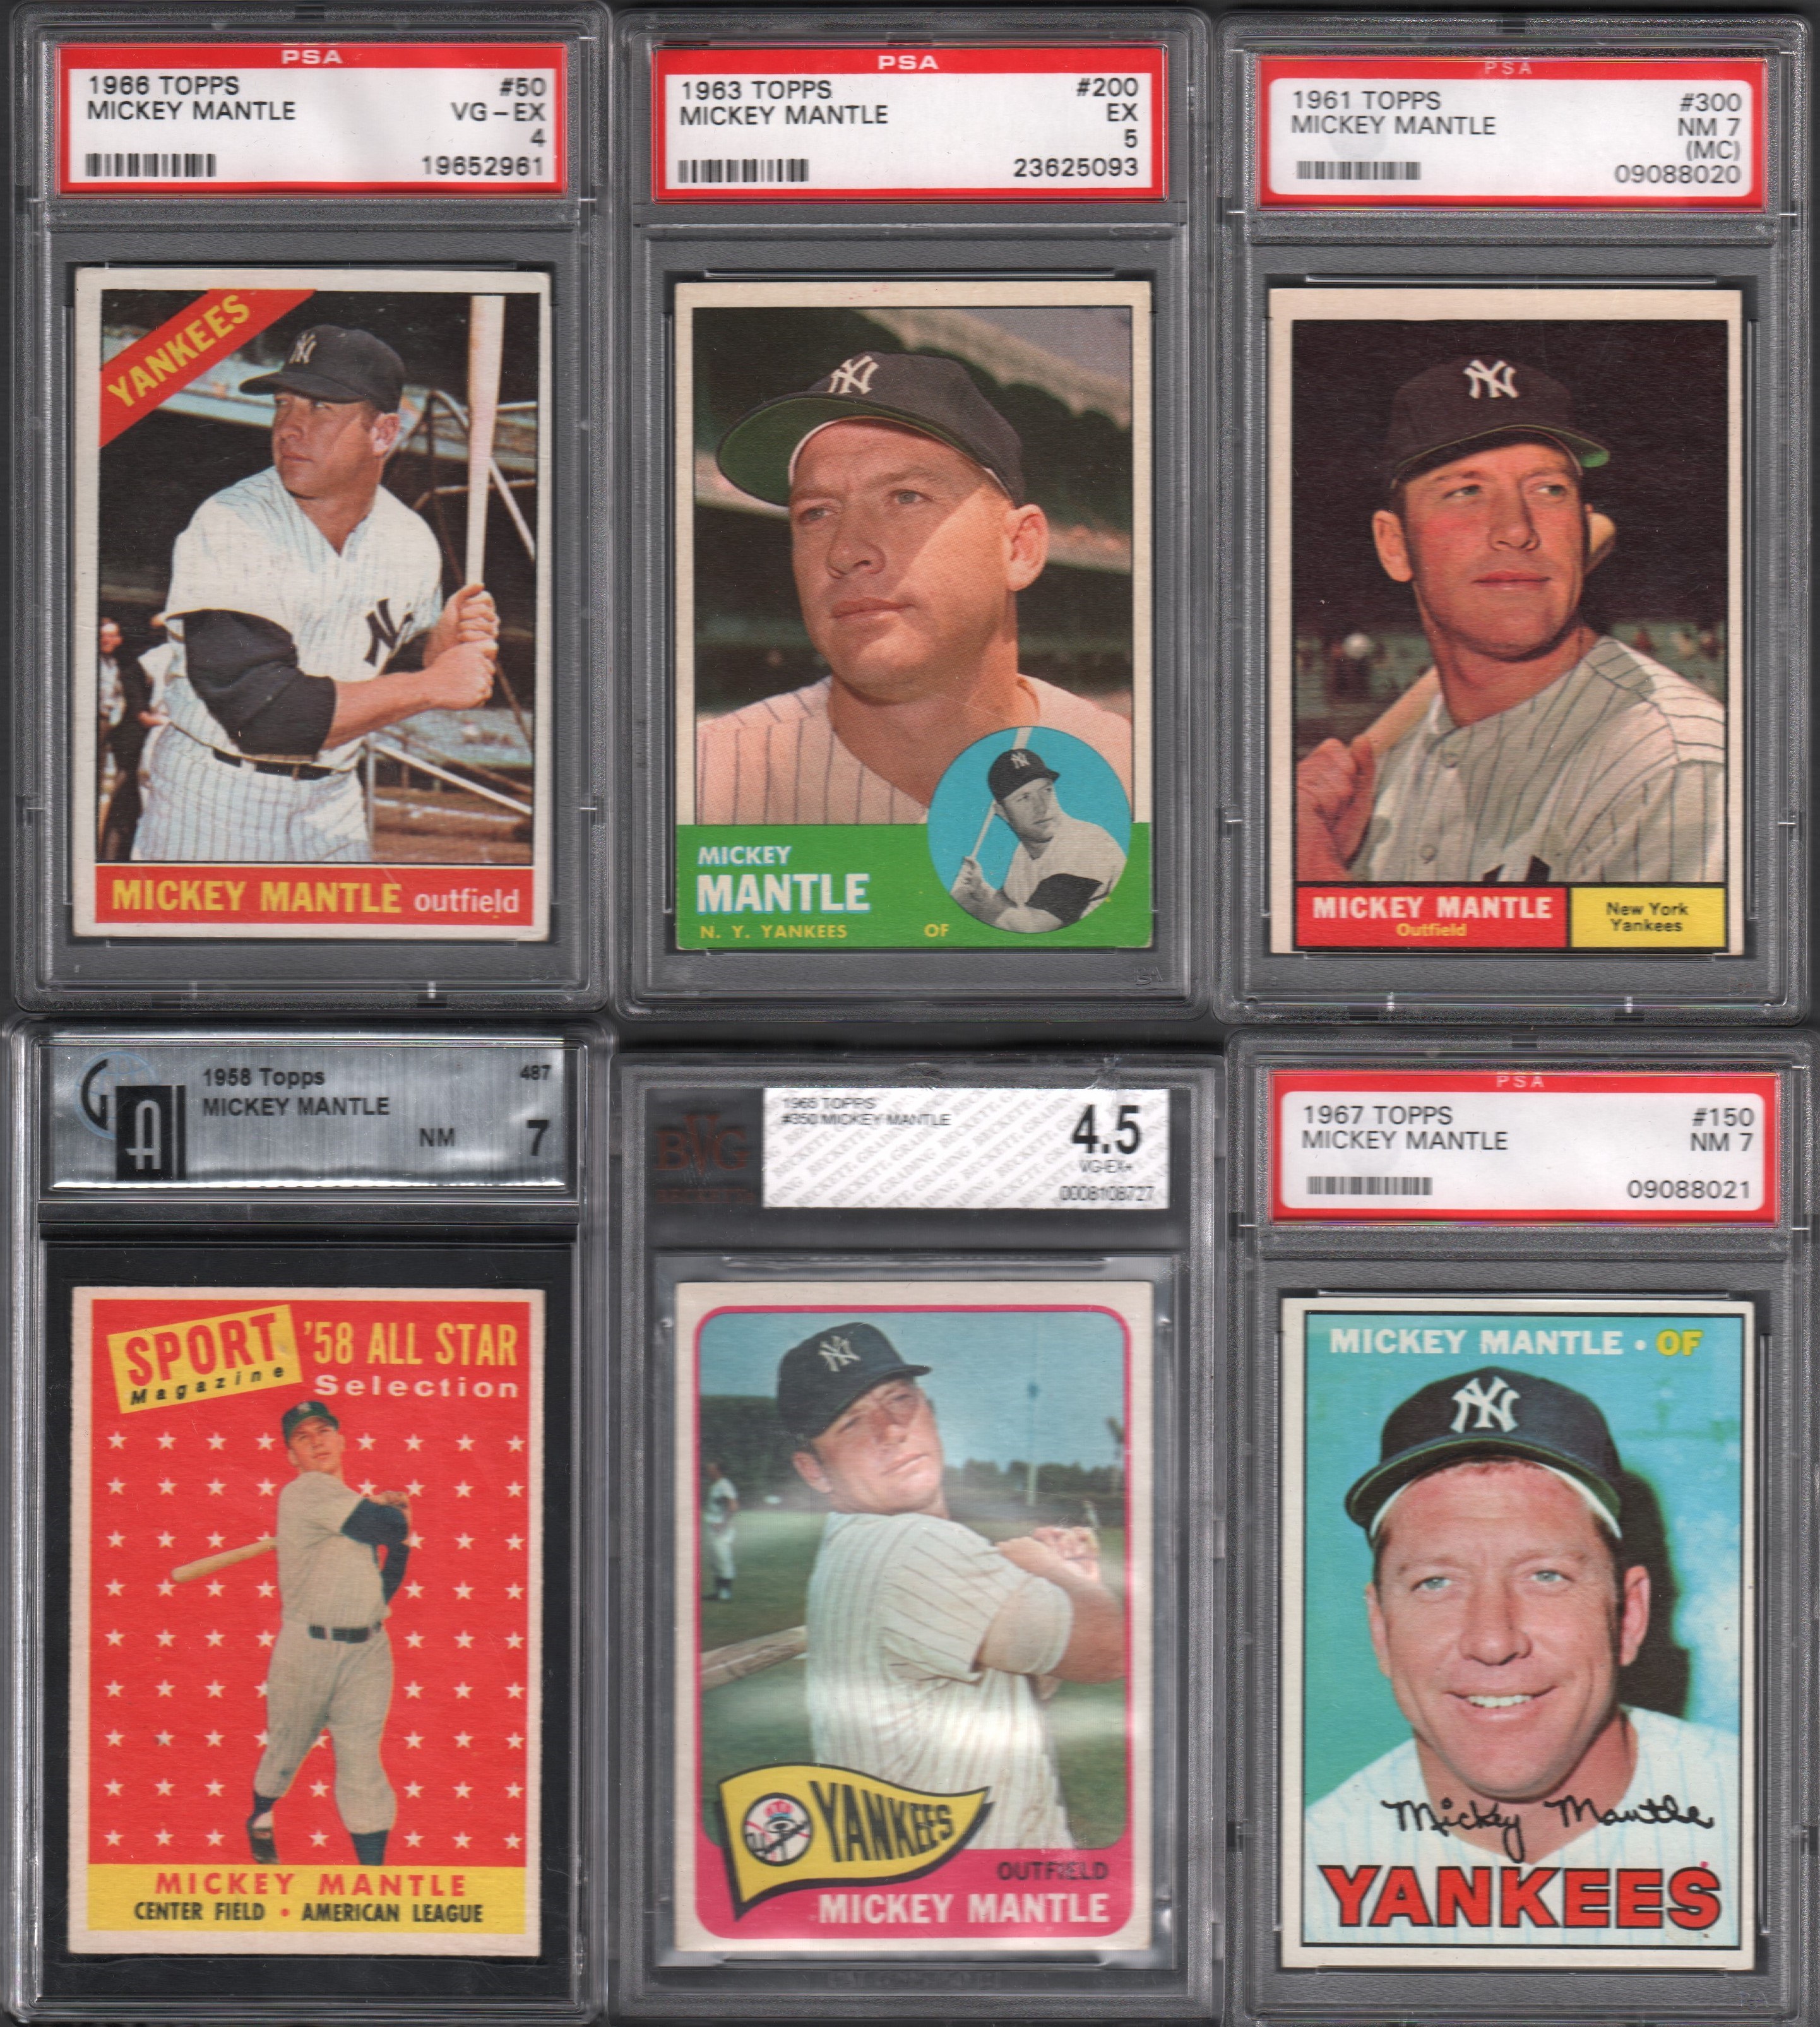 - Mickey Mantle Topps and Bowman Graded Card Lot (11)